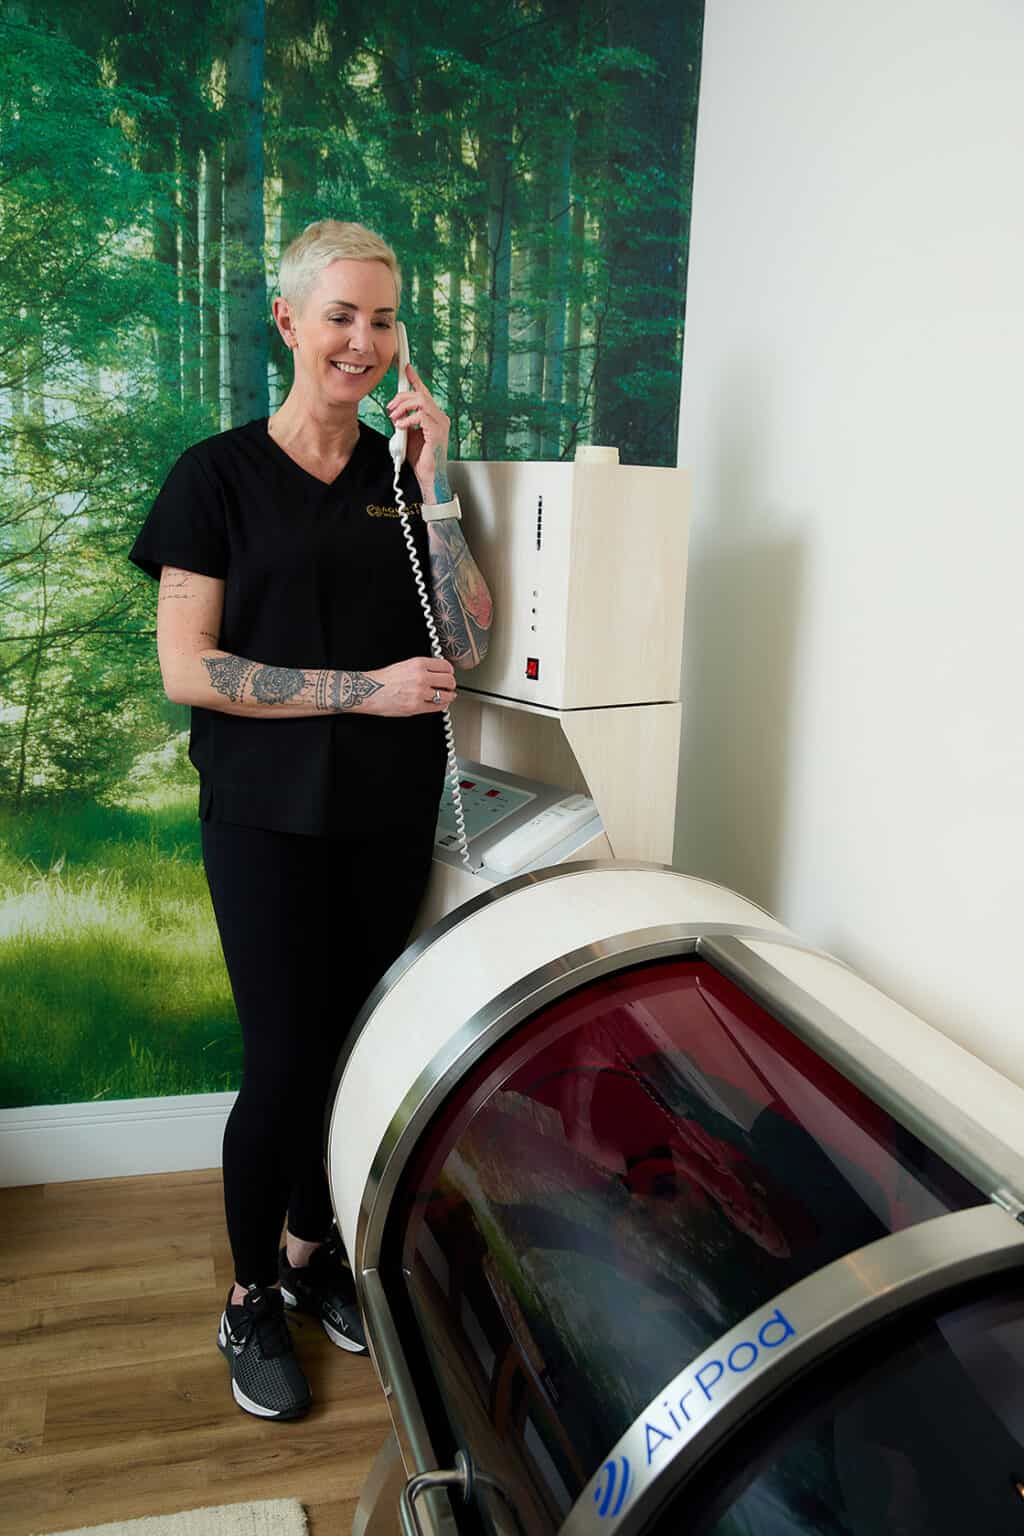 a female with short platinum blonde hair speaks to a client in a hyperbaric oxygen chamber through a telephone intercom system